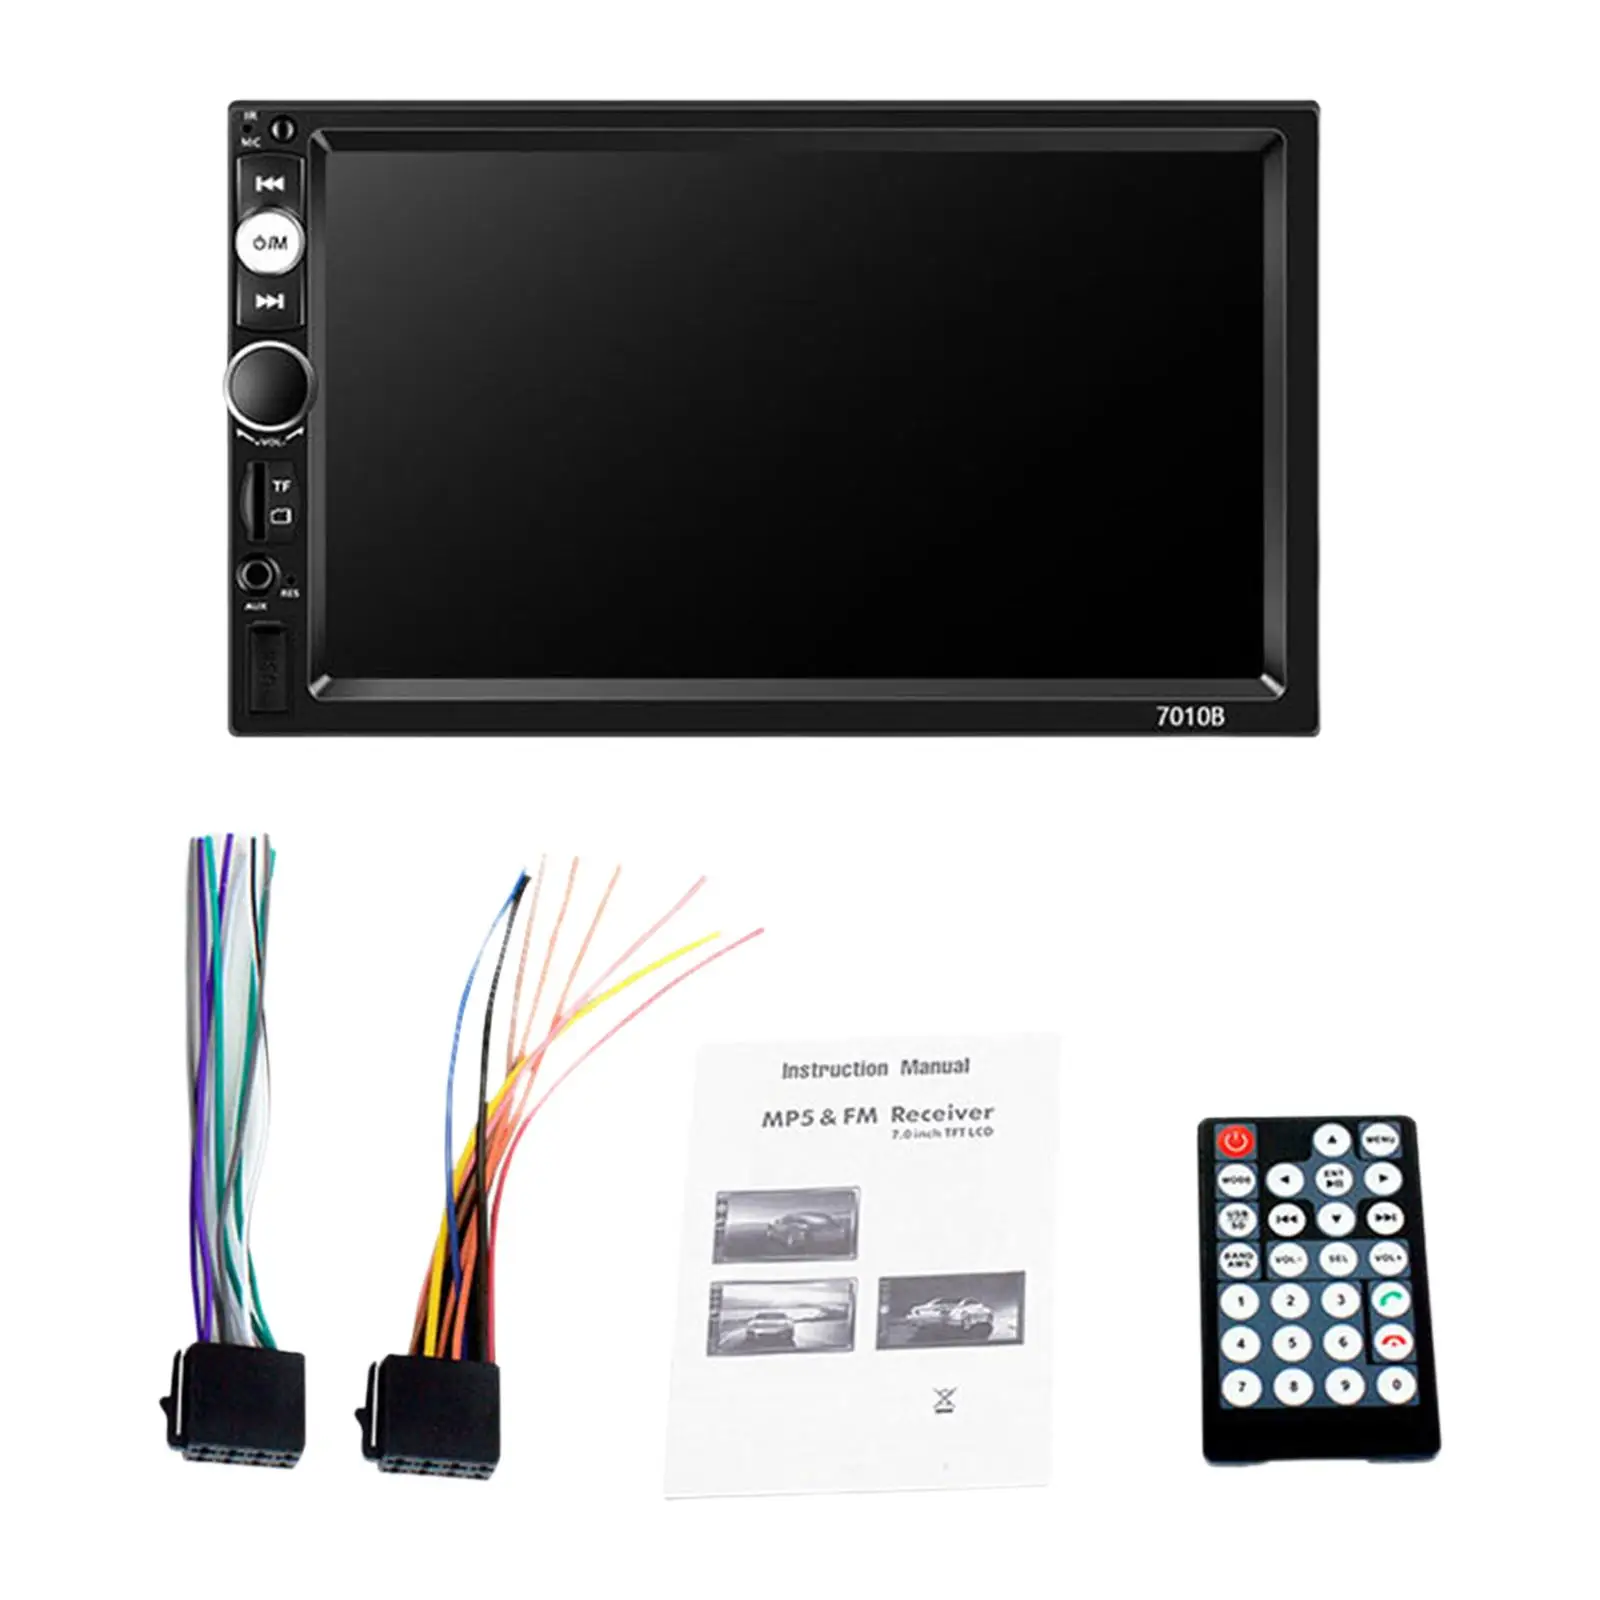 Car Stereo Radio 7in LCD Touchscreen Handsfree Calling for Car Vehicles